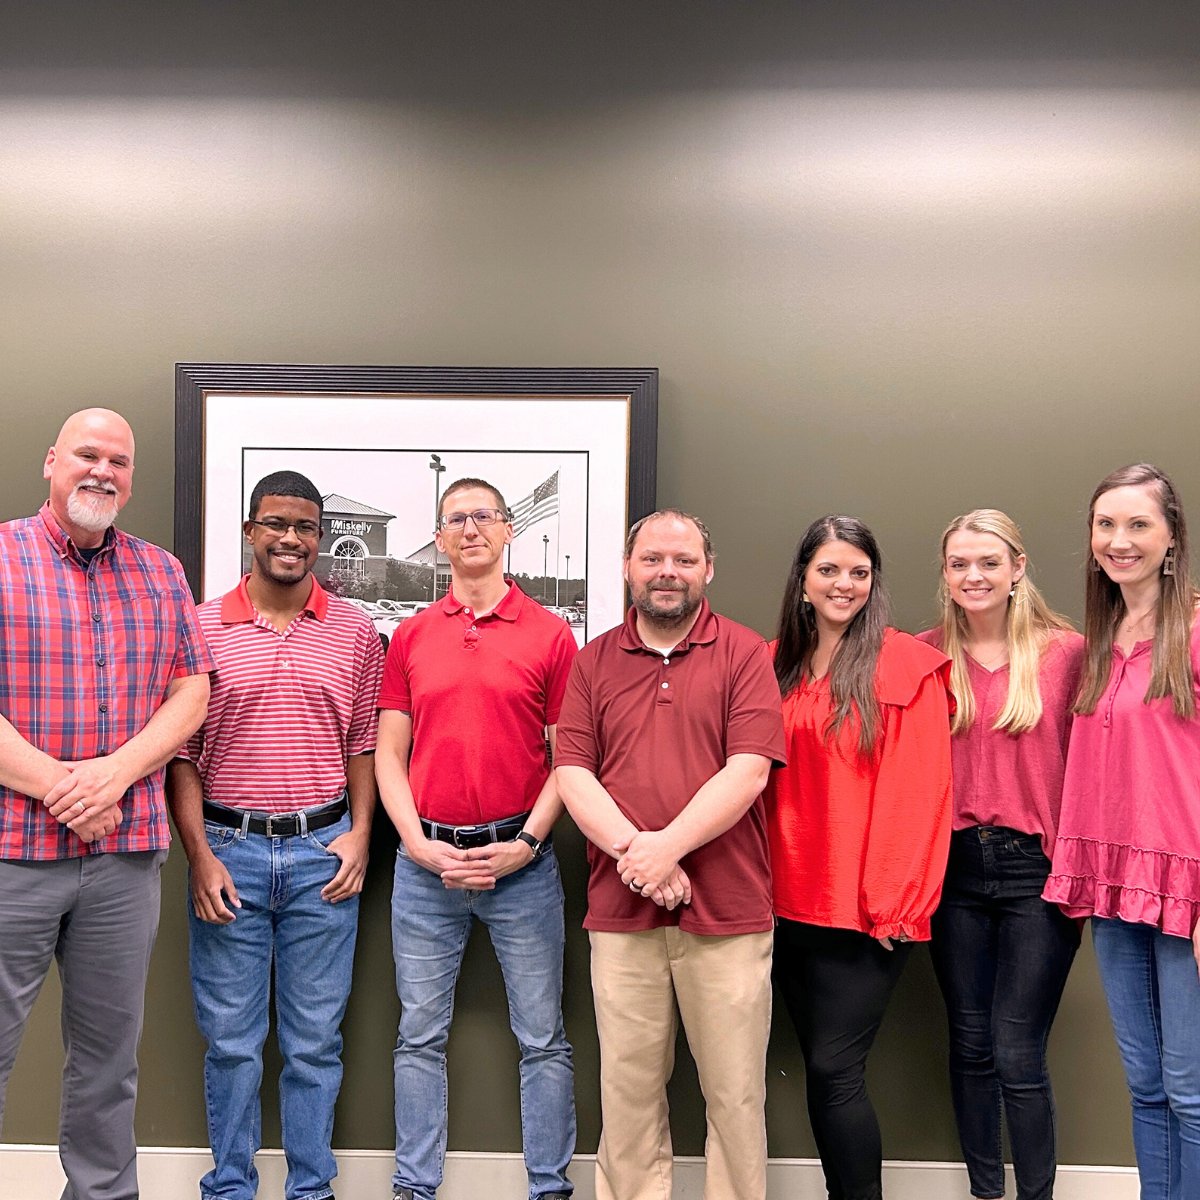 Our team members are showing their support of cardiovascular health with National Wear Red Day! ❤️

#WearRedDay #GoRedForWomen #HeartHealth #AmericanHeartMonth #HeartDiseaseAwareness #miskellyfurniture #stayhealthy